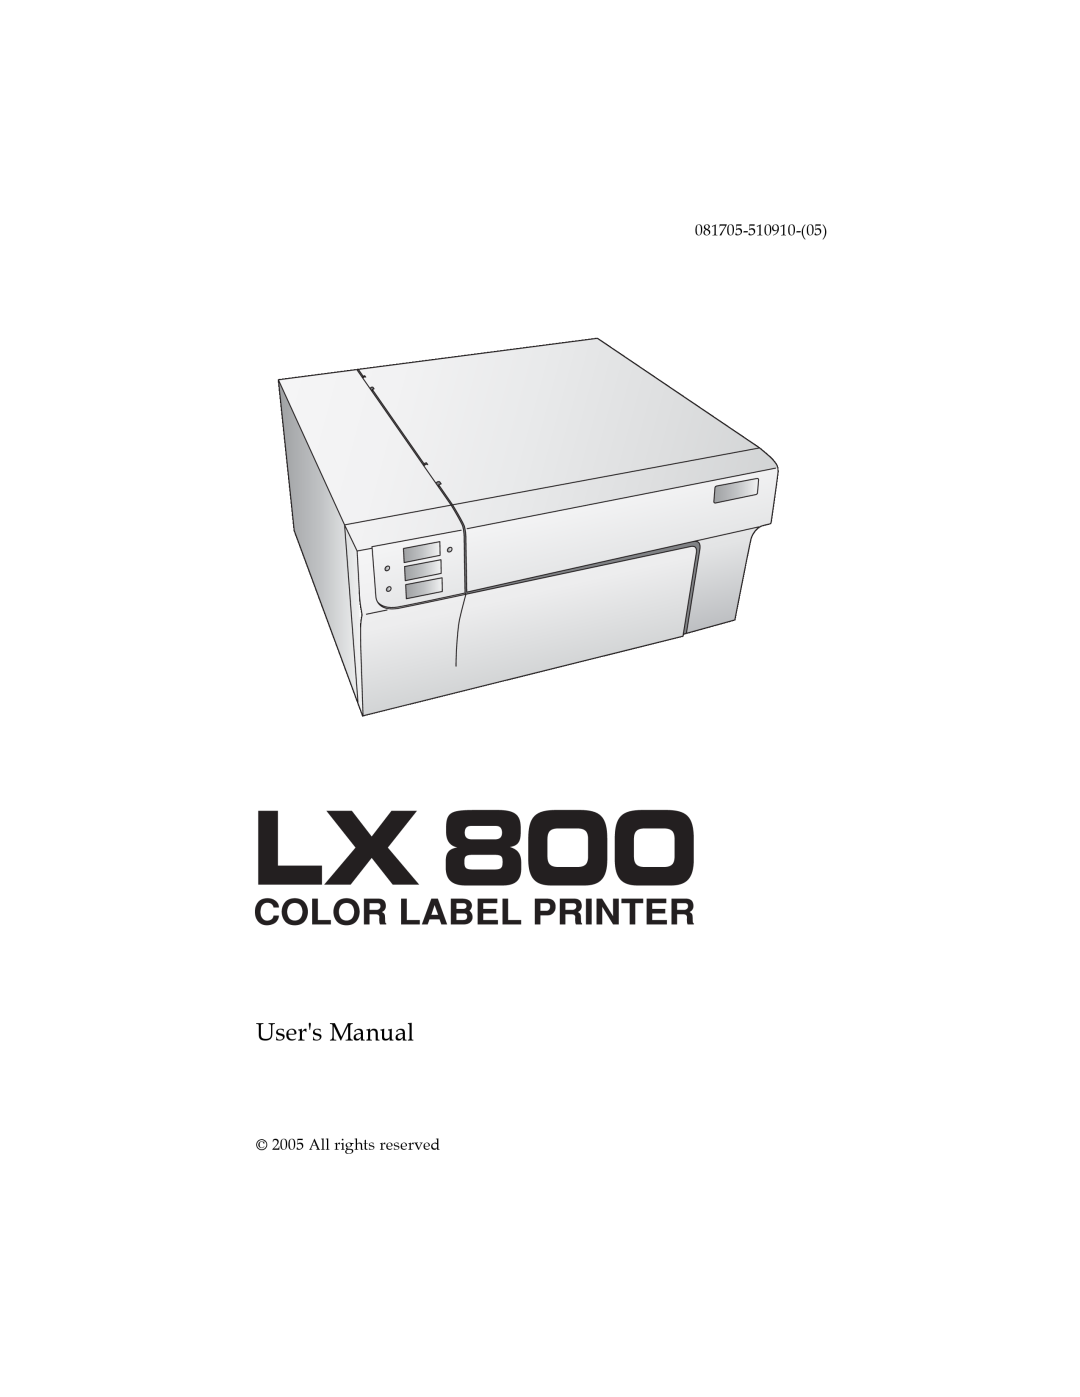 Primera Technology LX800 user manual Users Manual, 081705-510910-05, All rights reserved 